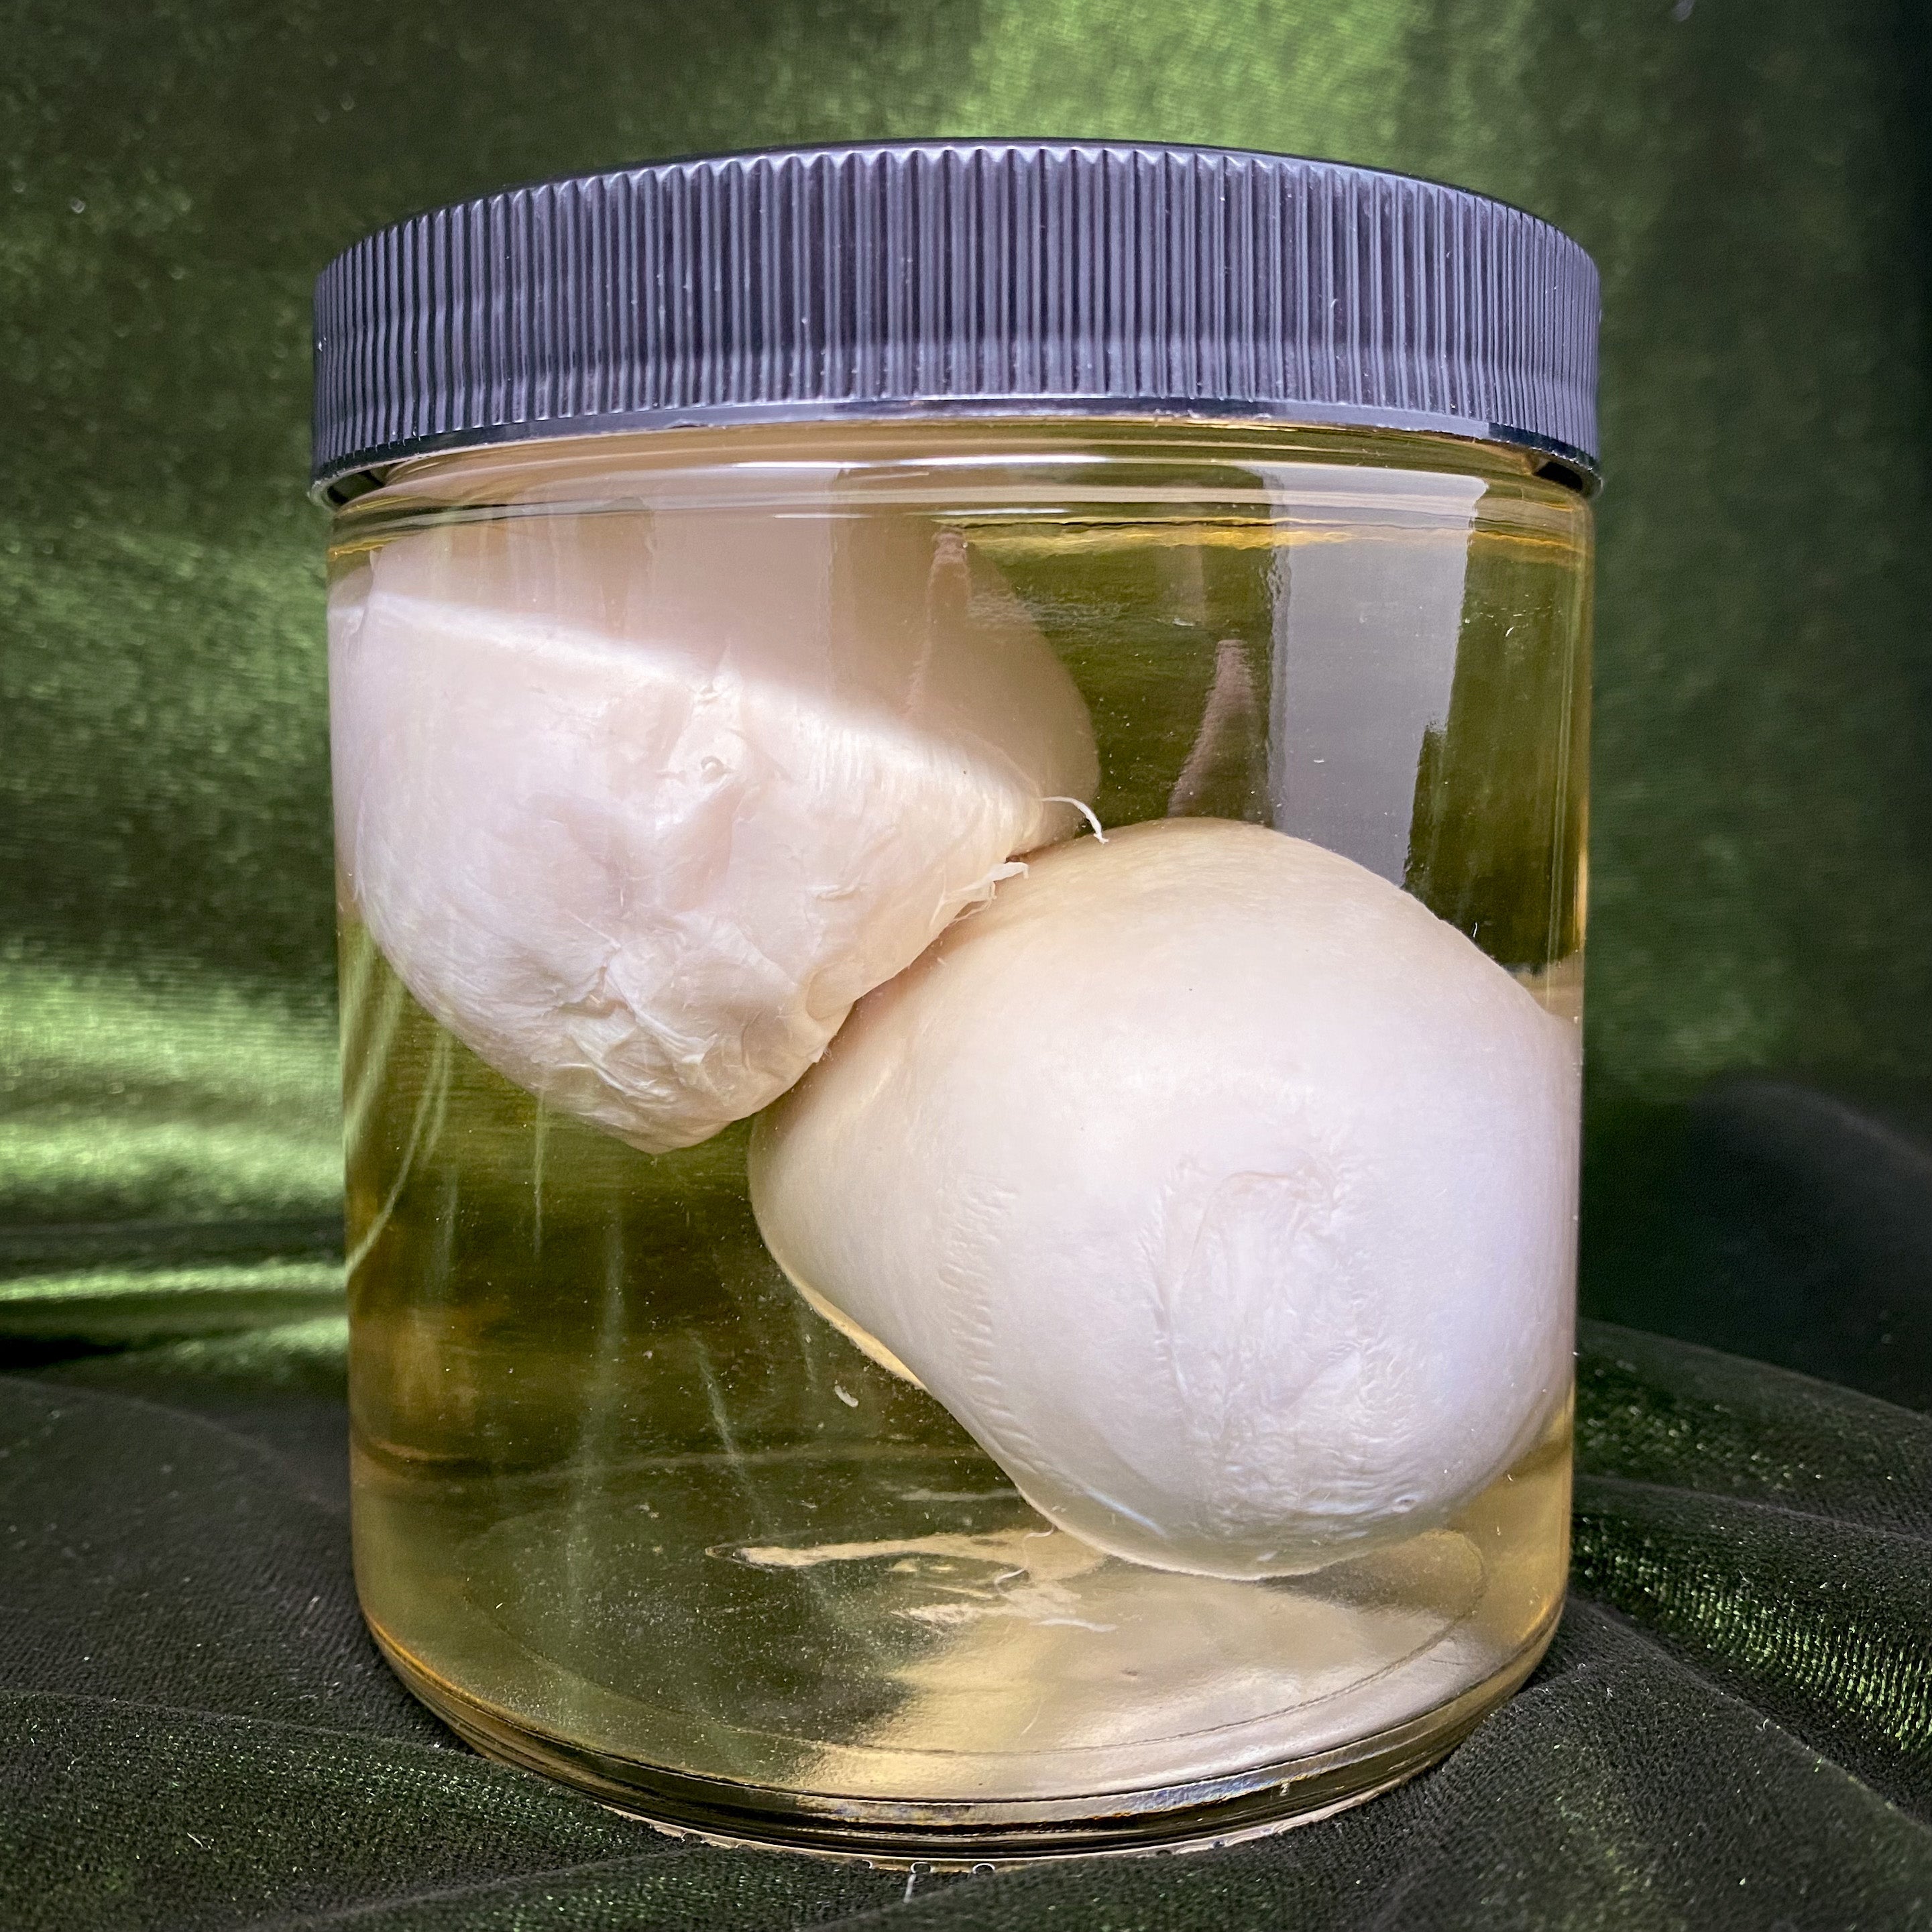 anthony spillman recommends Picture Of Testicles In A Jar